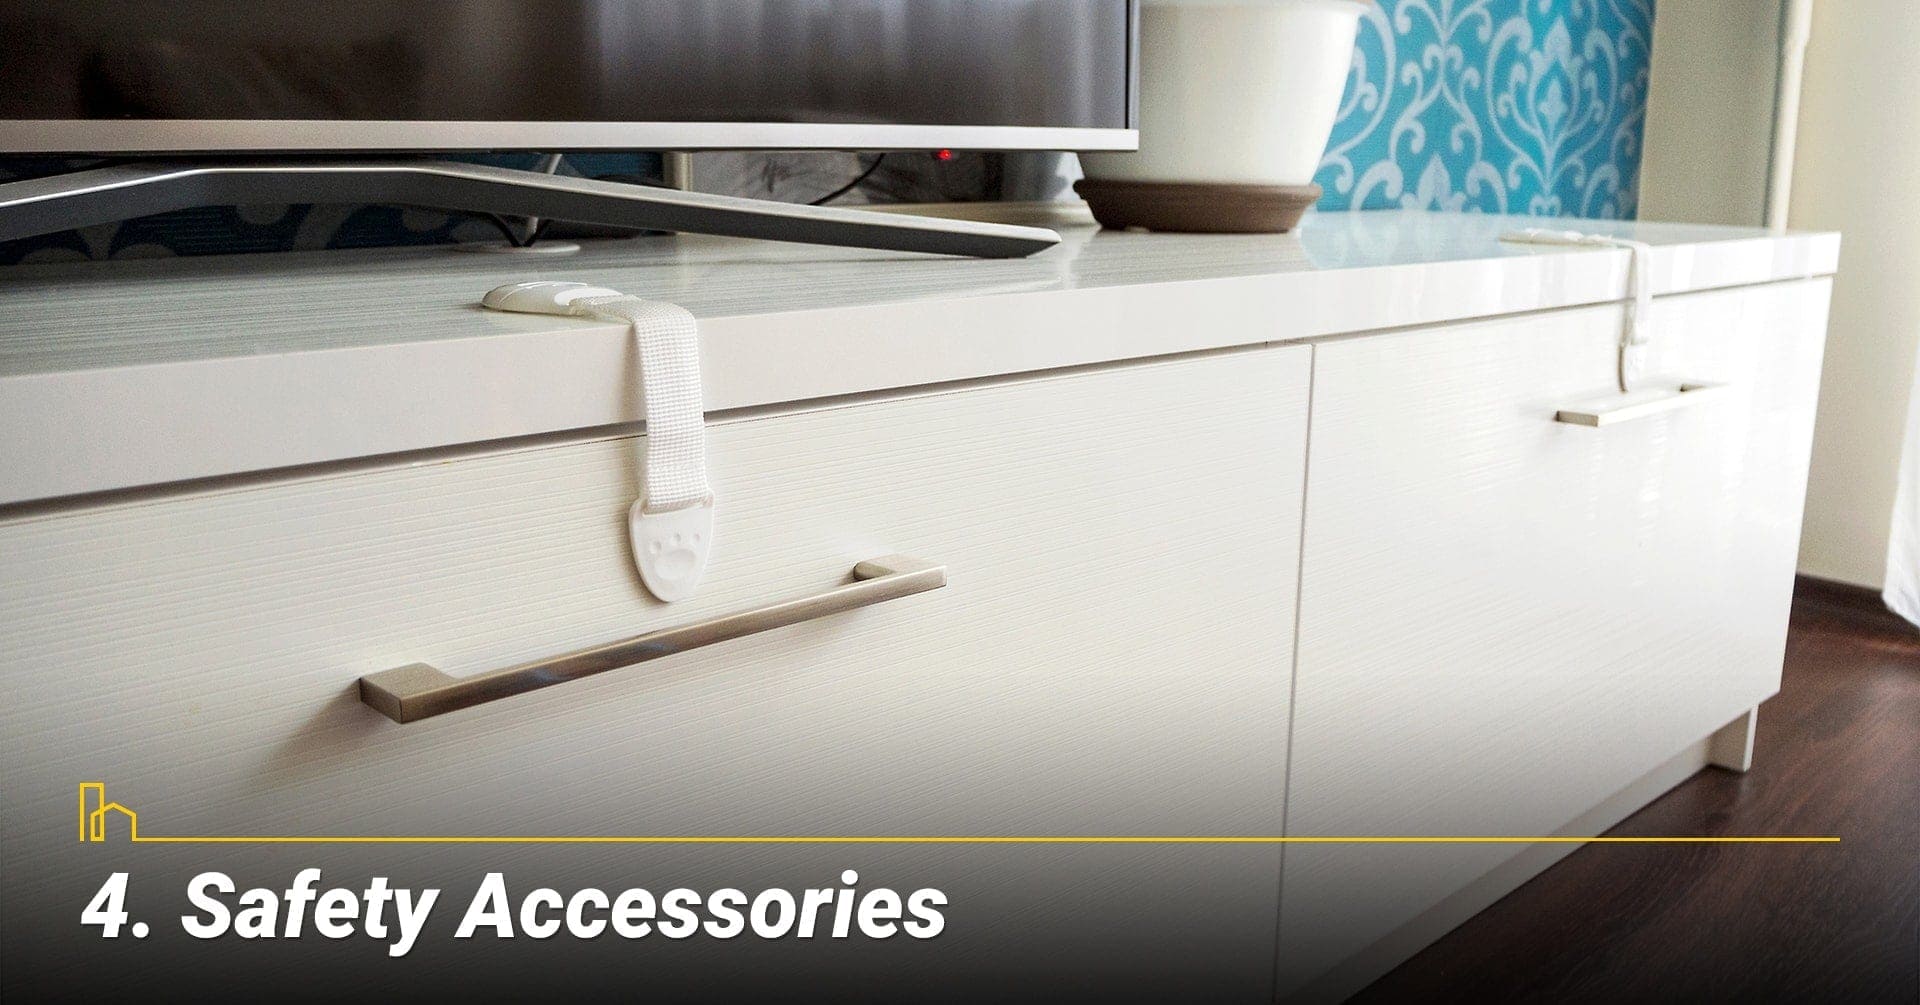 Safety Accessories, secure all furniture